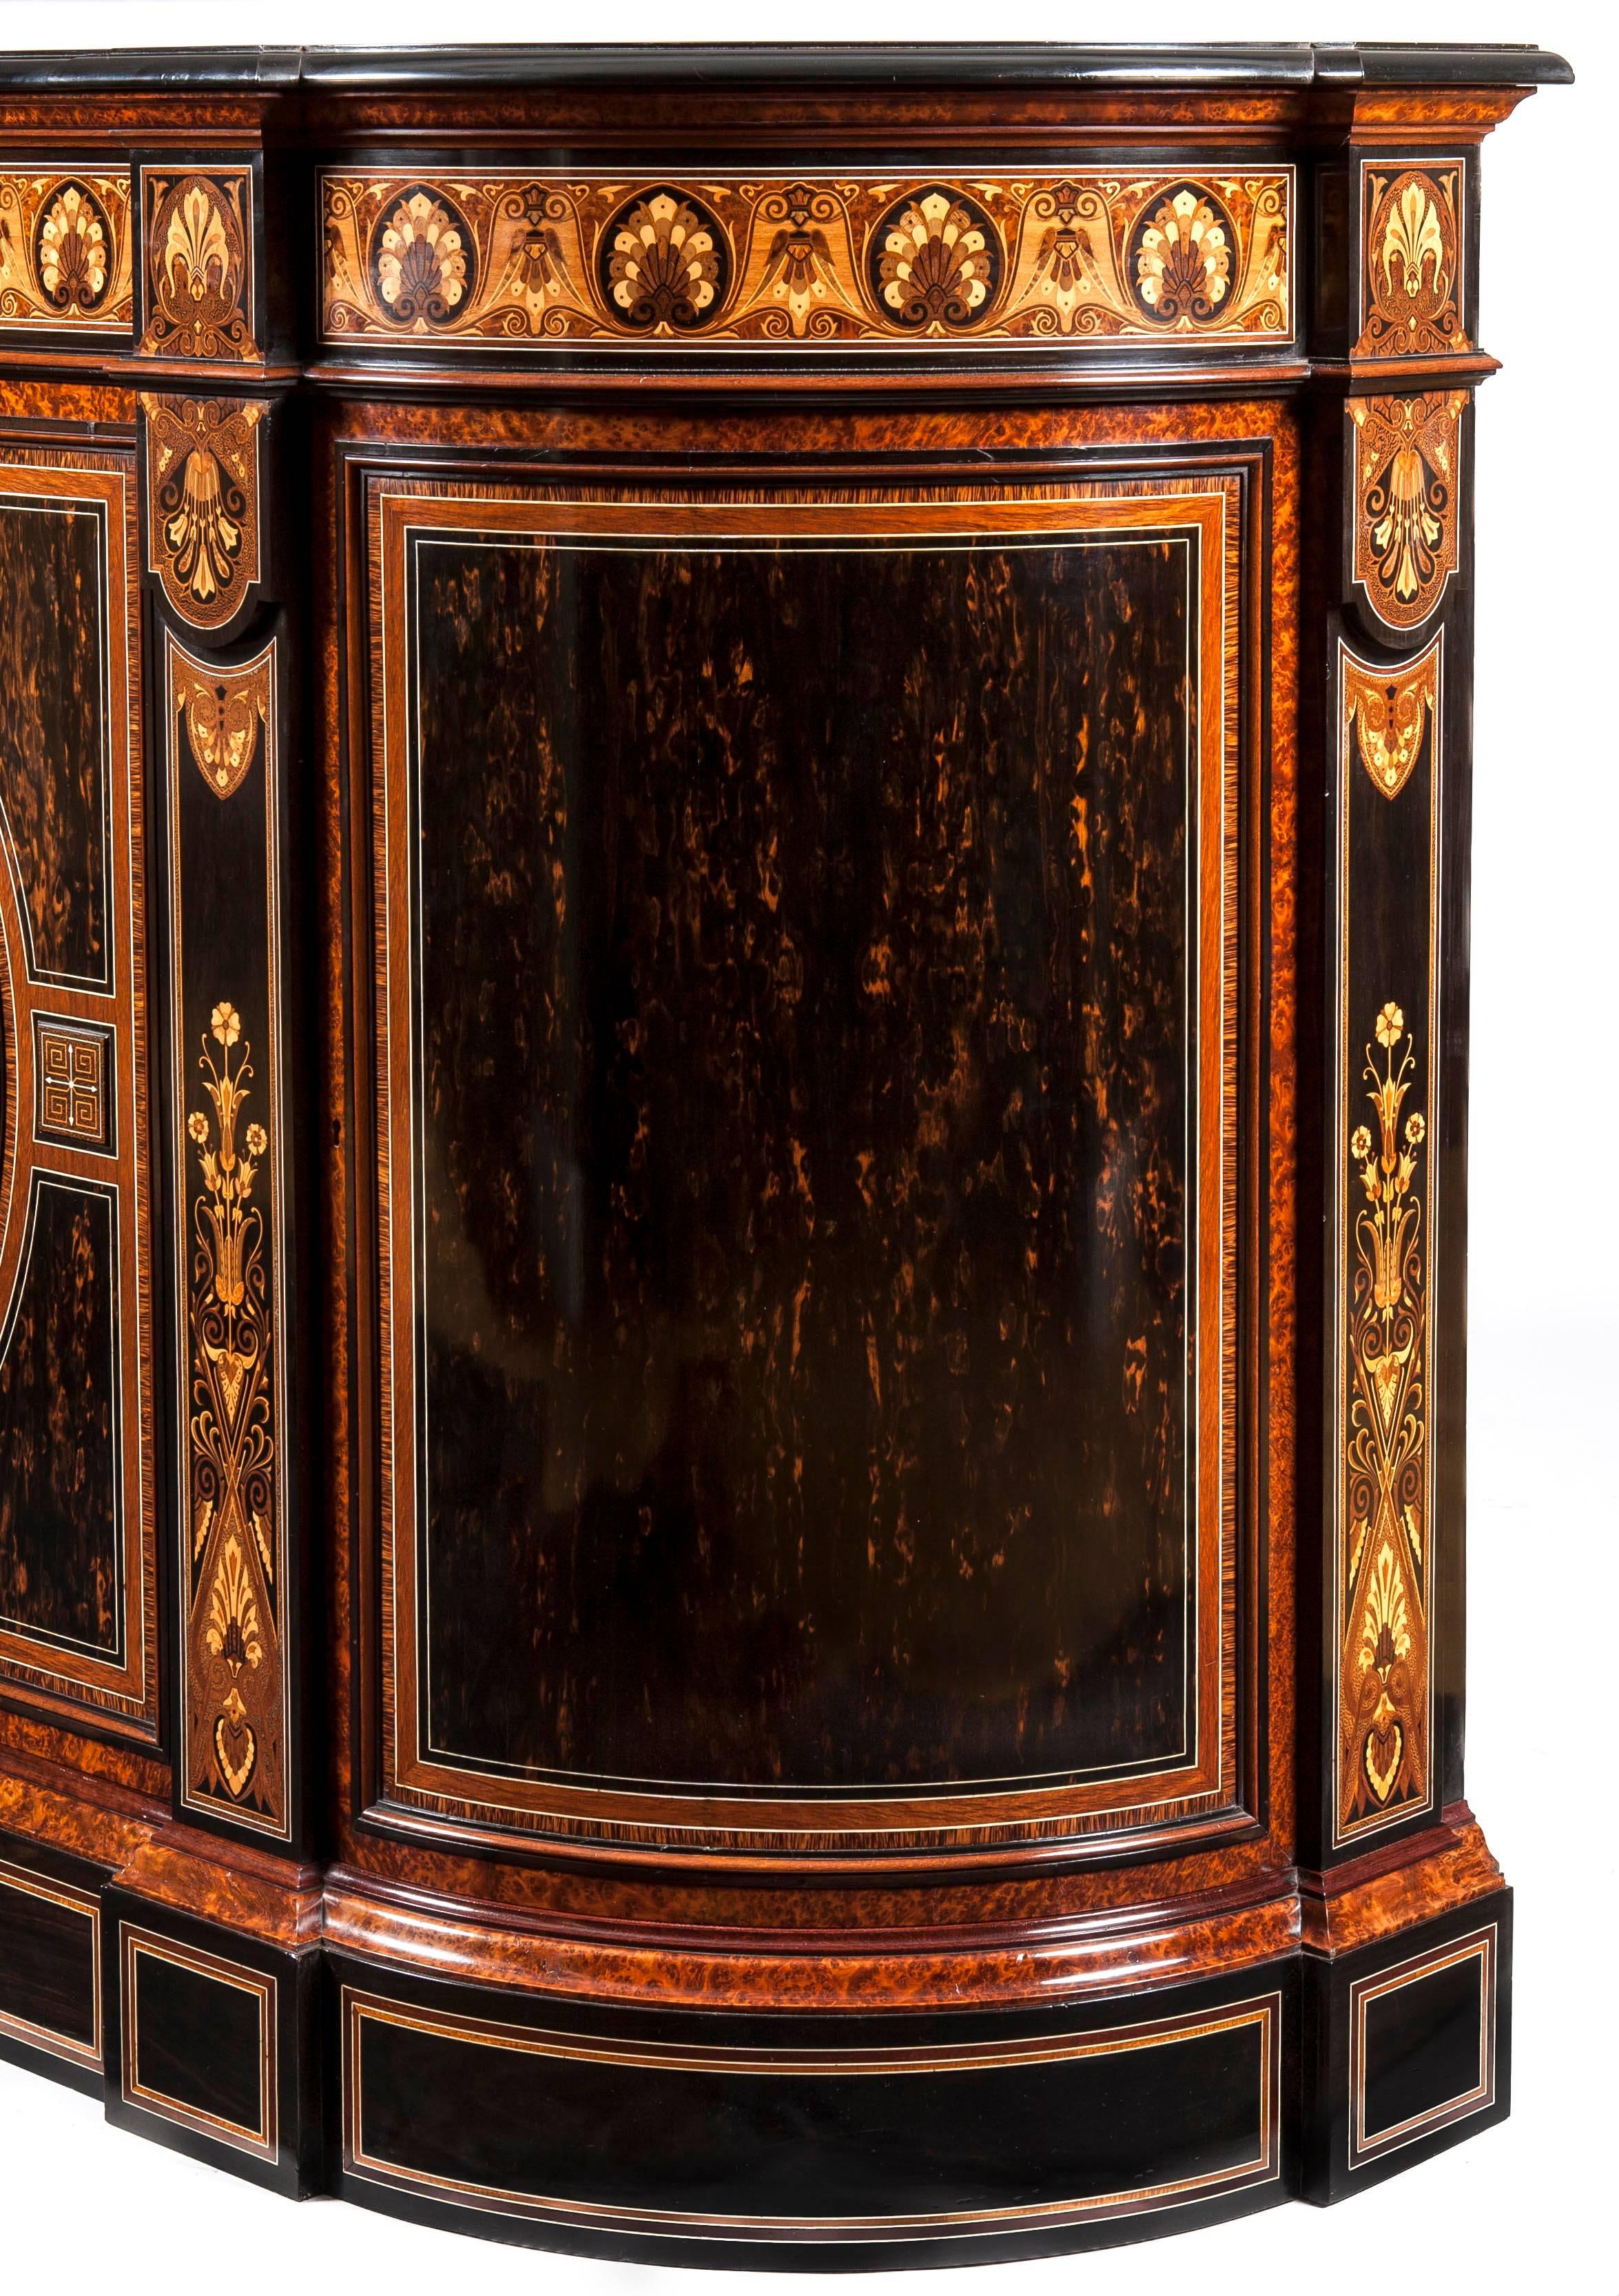 A very fine enclosed cabinet of the aesthetic period
Firmly attributed to Jackson & Graham of London
 
Constructed using, befitting the aims of the Aesthetic Period, the very finest and rarest woods, including a beautifully grained coromandel